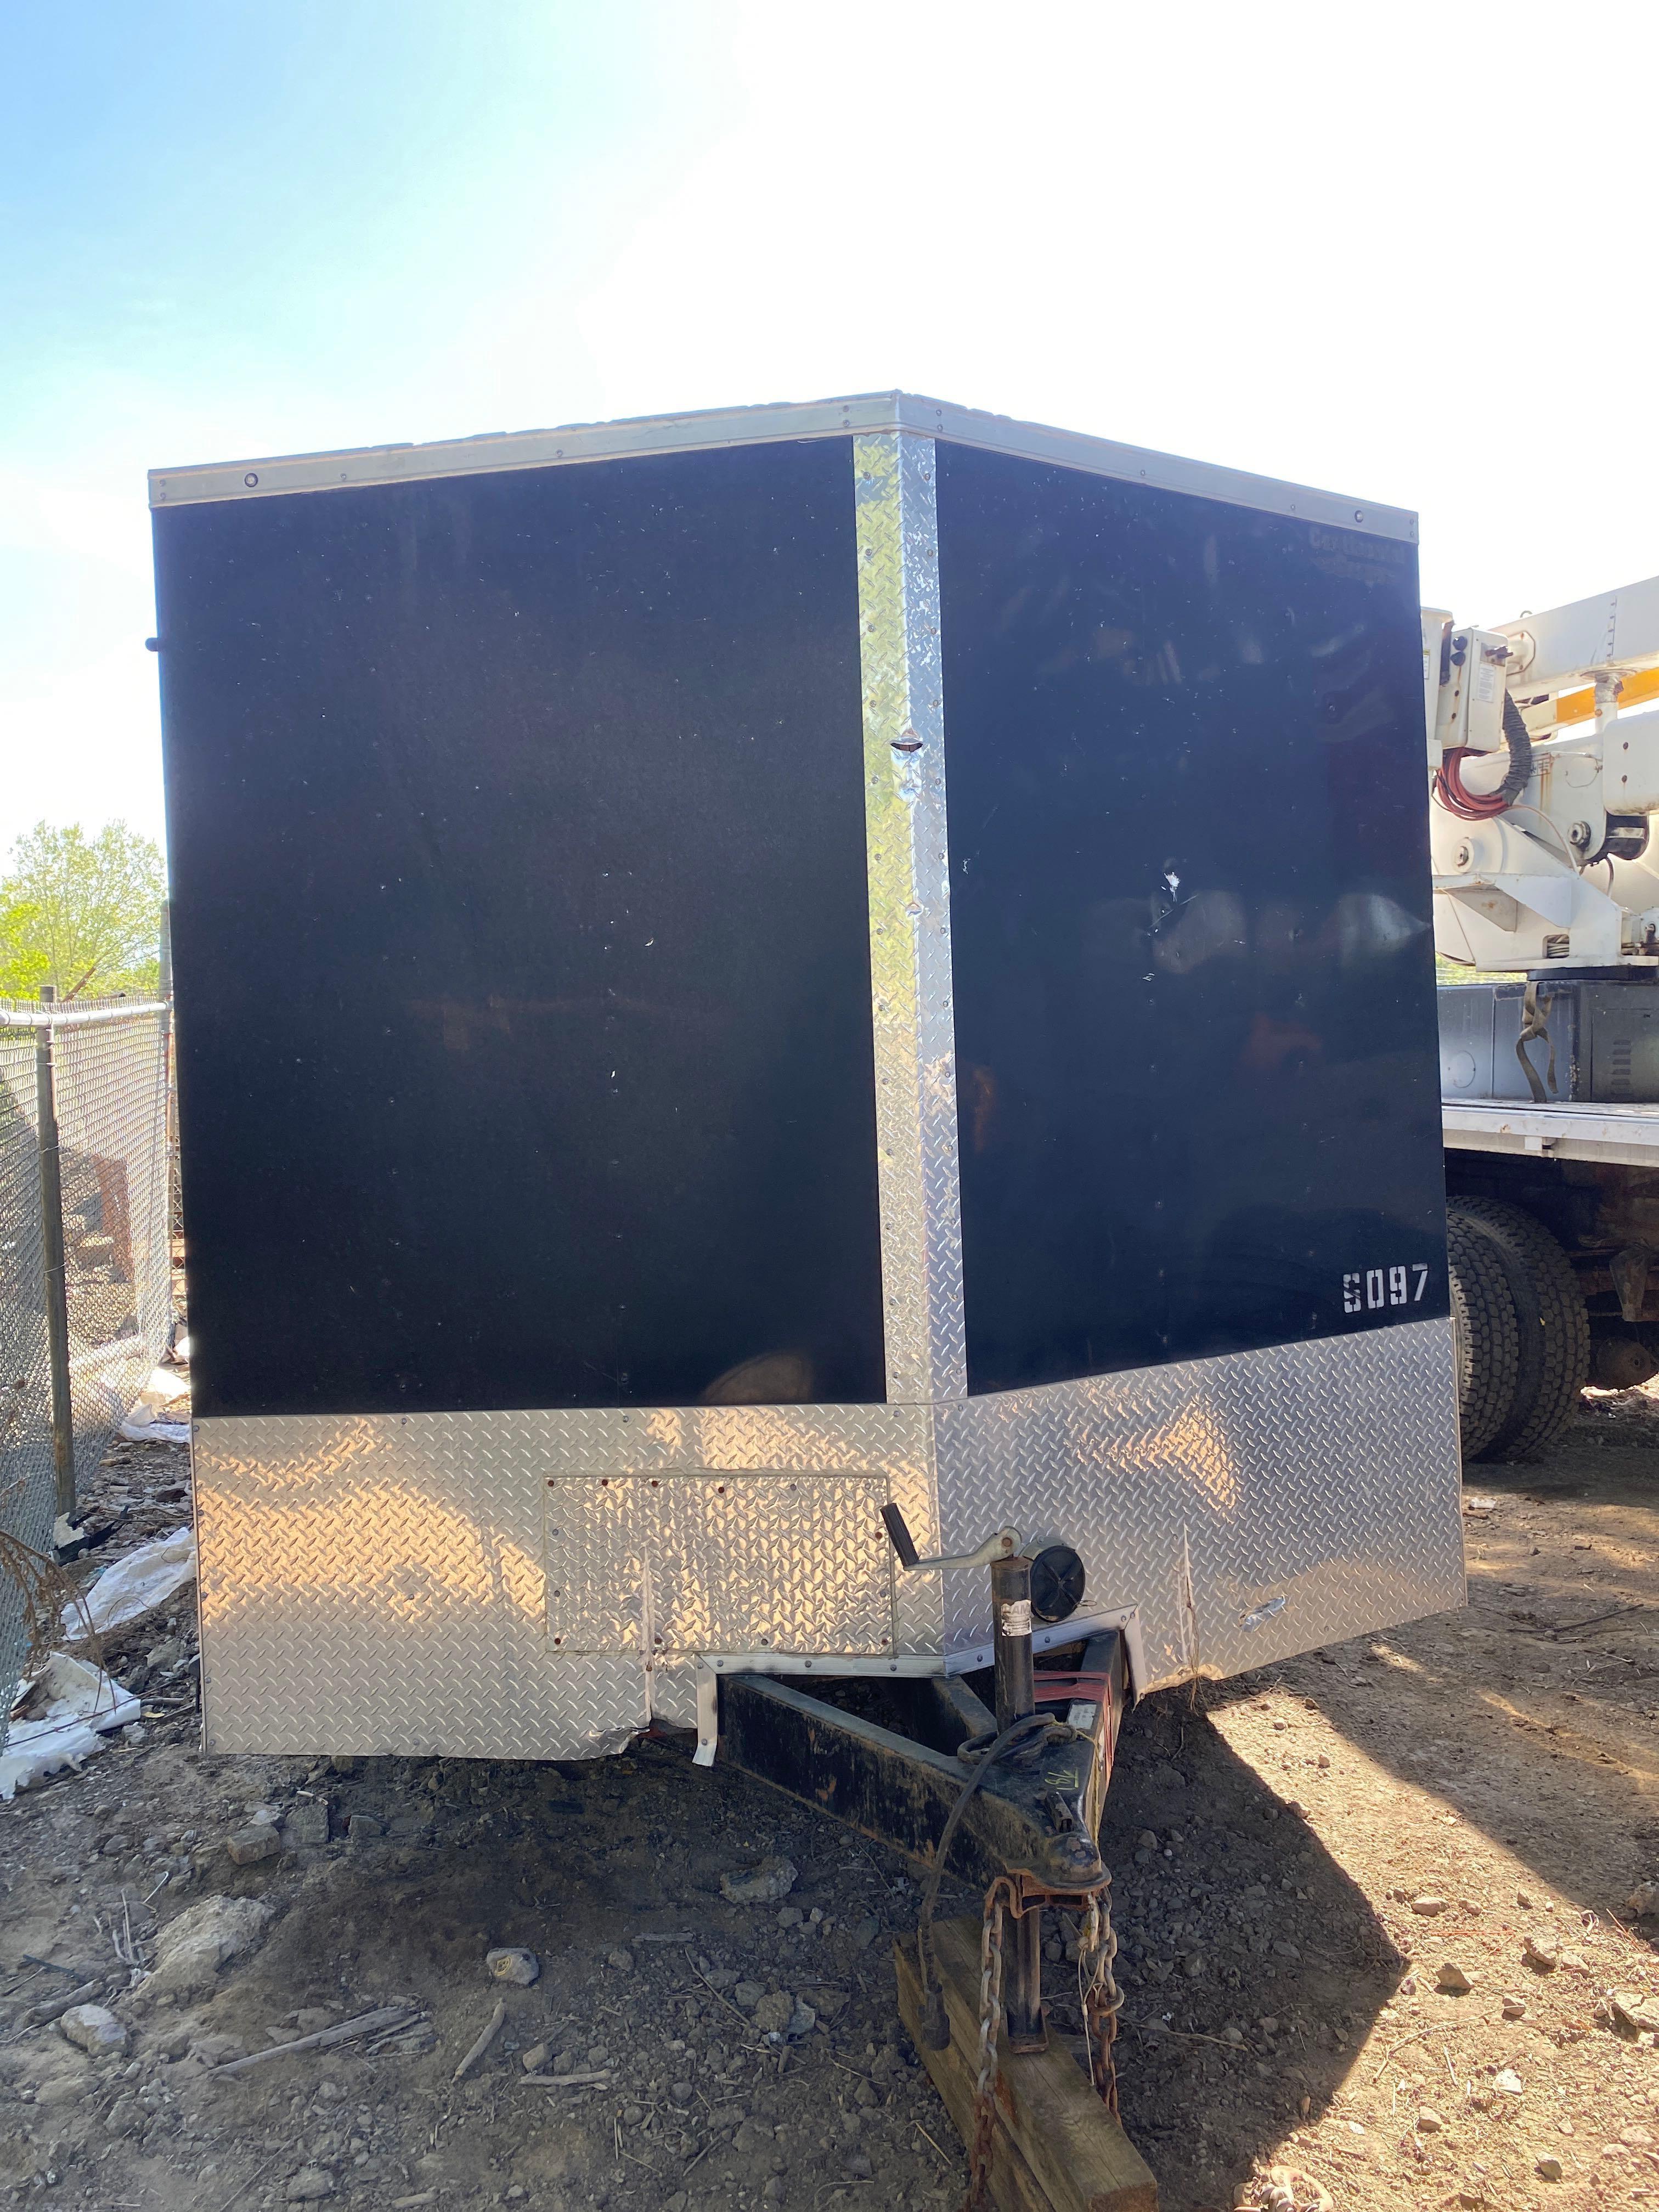 2016 Forest River Co 20ft Tandem Enclosed Box Trailer (located offsite-please read full description)